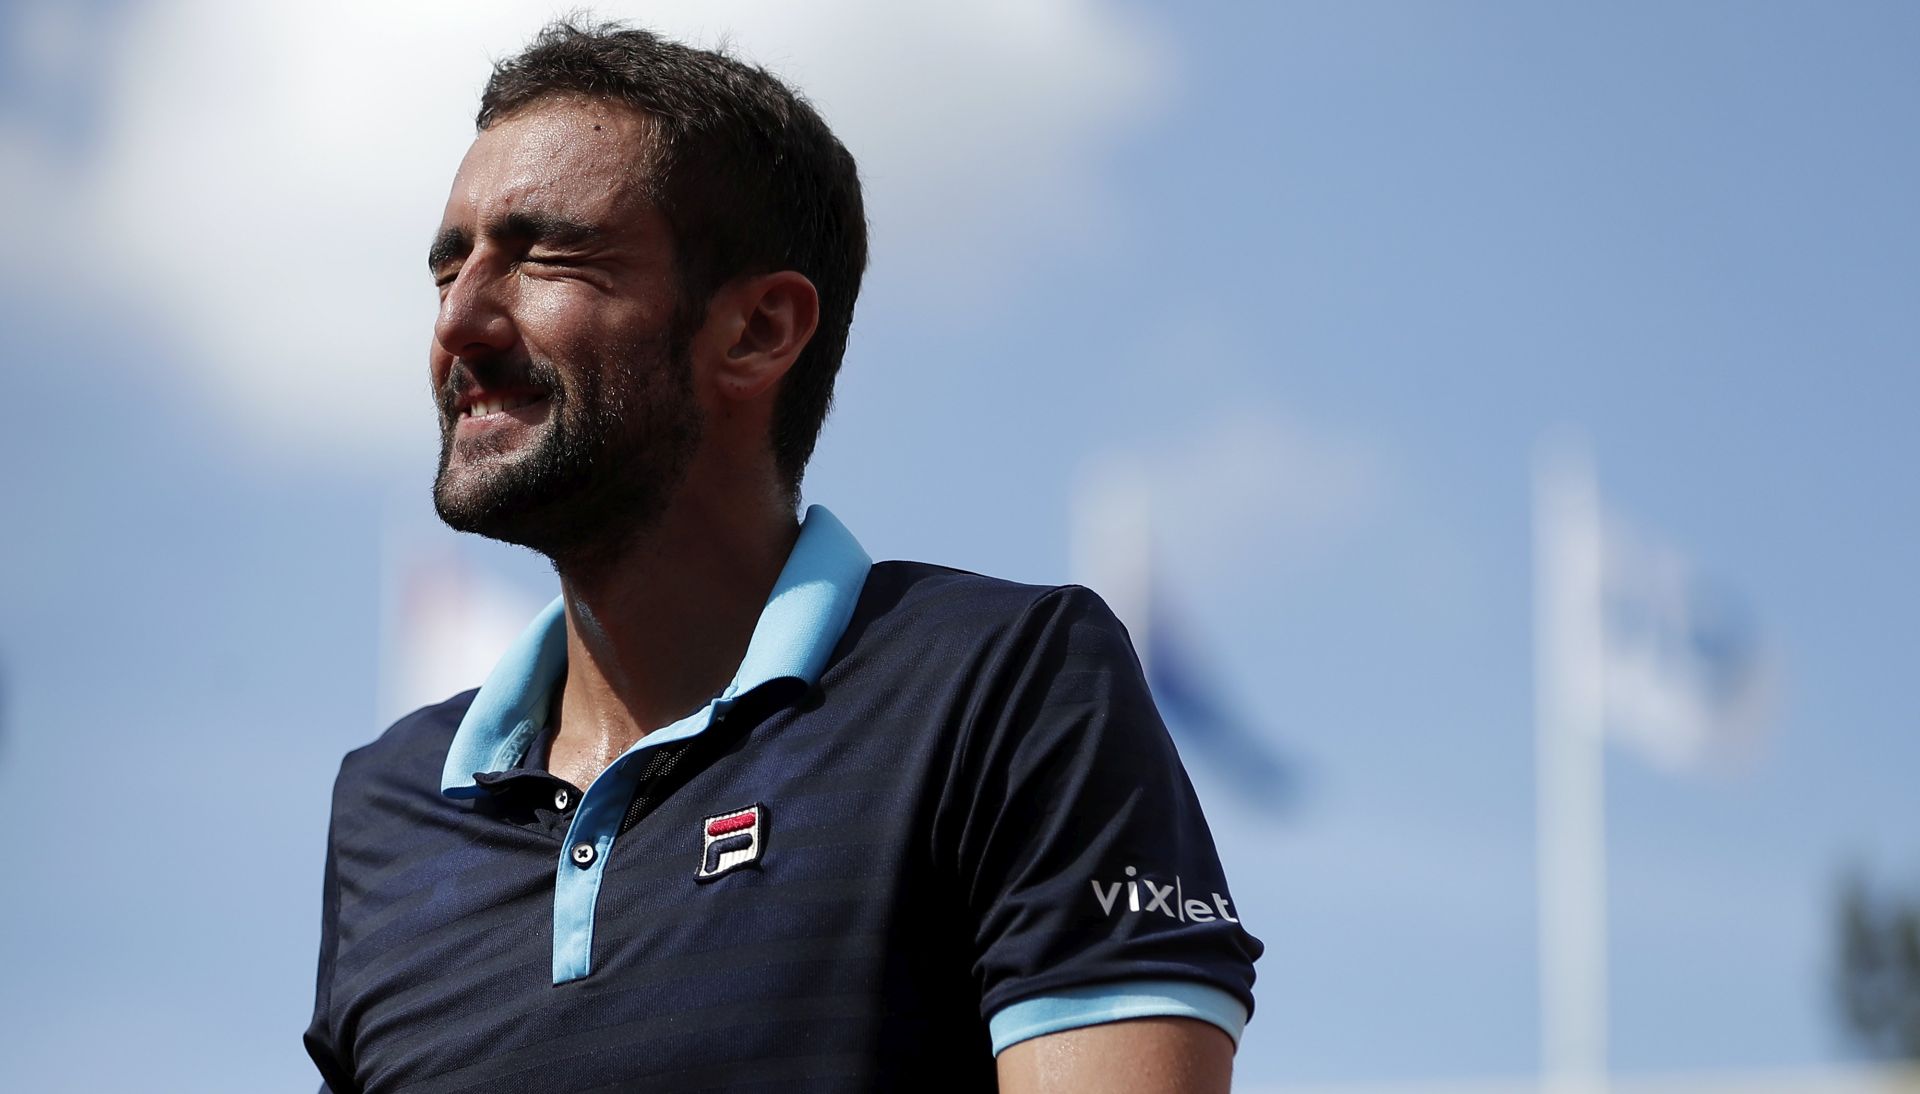 epa06015222 Marin Cilic of Croatia reacts as he plays against Stanislas Wawrinka of Switzerland during their men’s singles quarter final match during the French Open tennis tournament at Roland Garros in Paris, France, 07 June 2017.  EPA/IAN LANGSDON